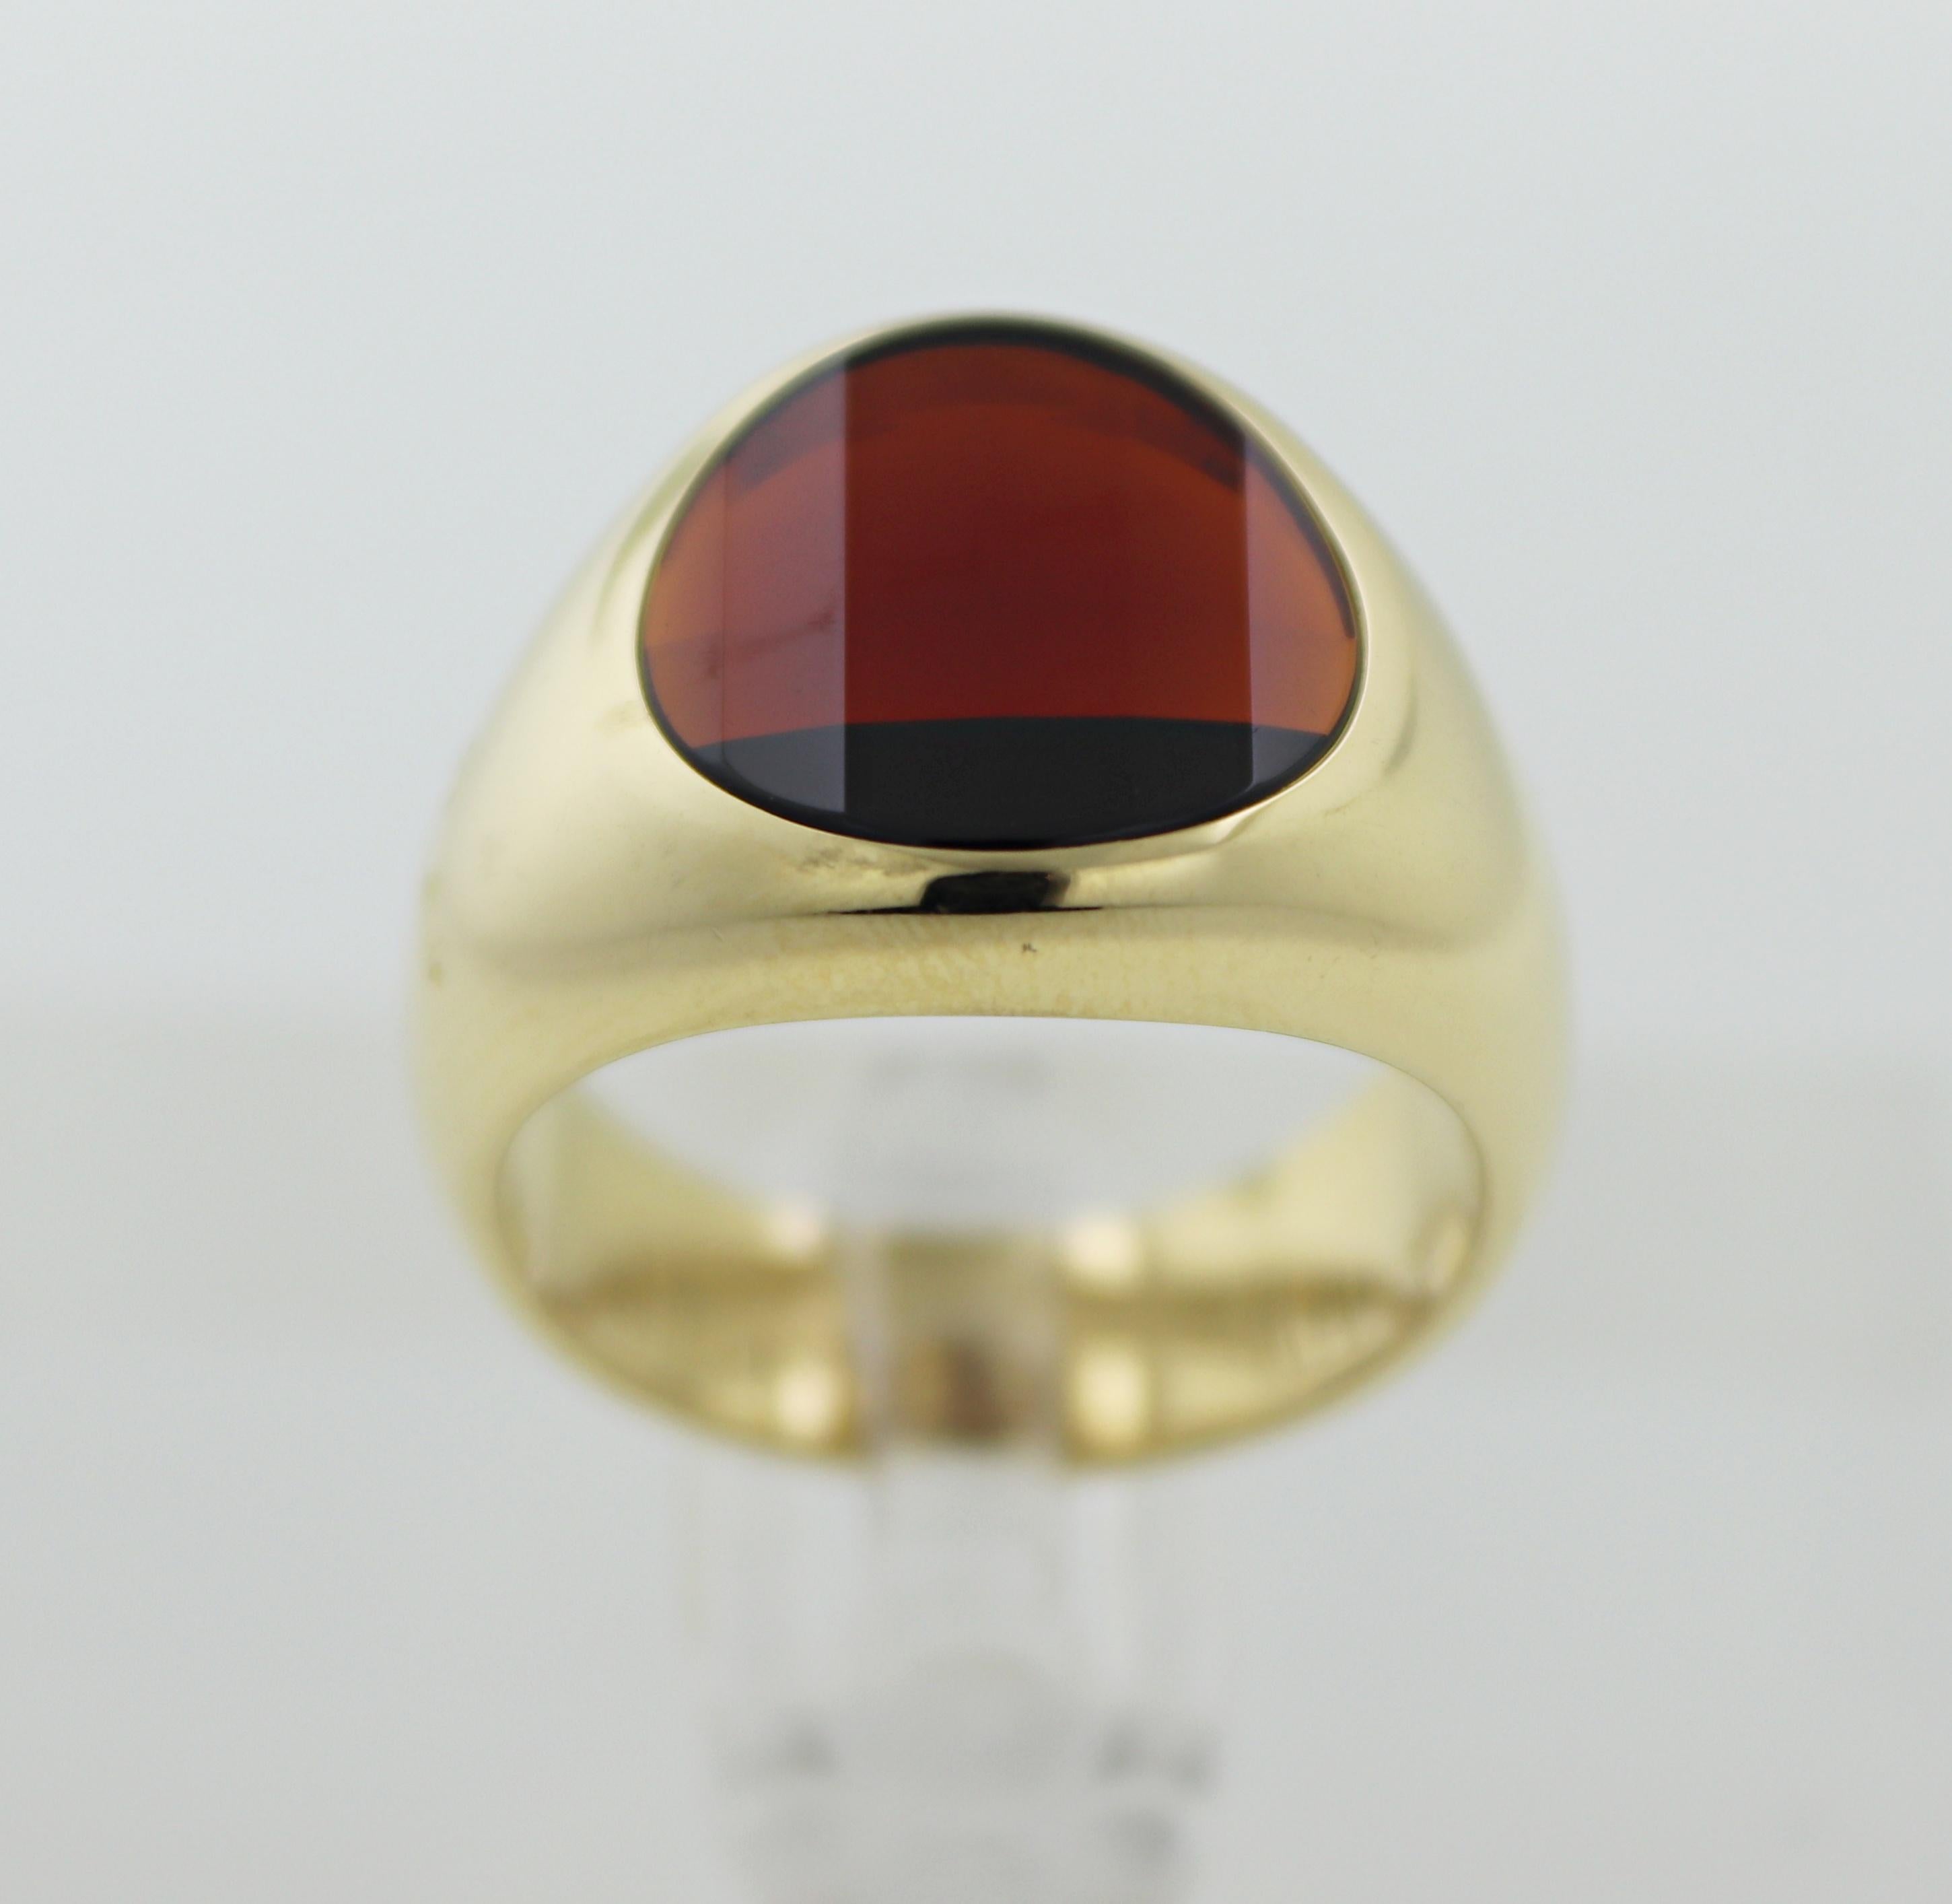 Featuring (1) faceted top round-cut garnet, 12.00 X 12.00 X 2.00 mm, flush set in a 14k yellow gold gypsy
mounting, tapering from 13.9 to 5.7 mm, size 5.75, marked Pomellato, 750, 18K, Italian hallmarks, 11.45 grams.